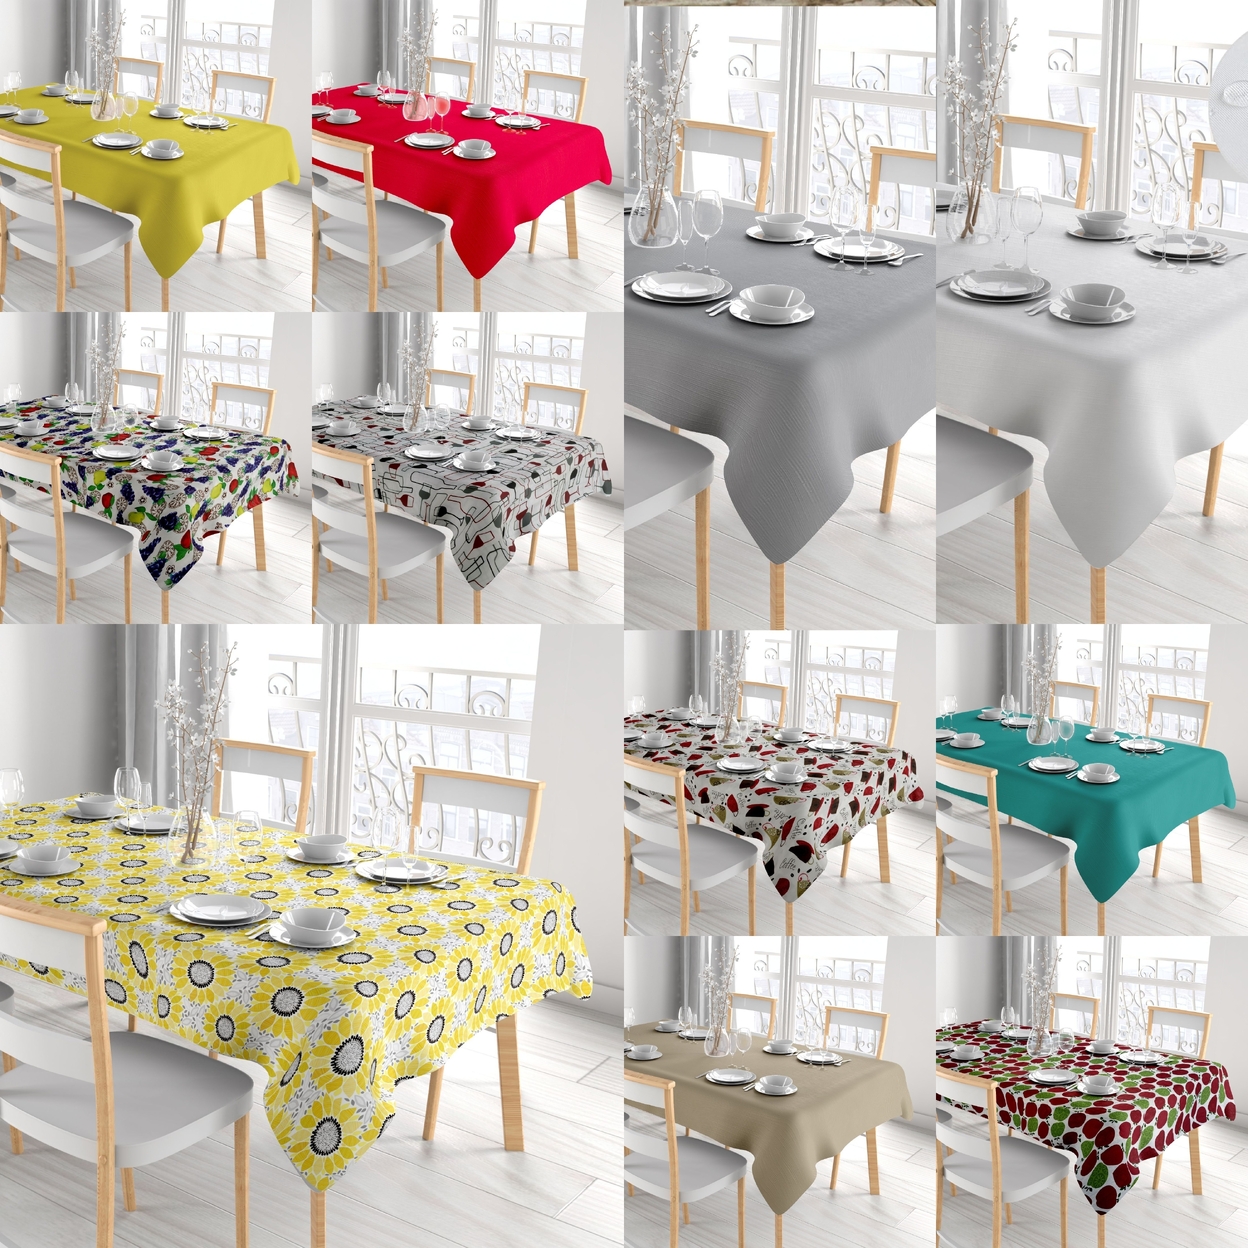 Multi-Pack: Kitchen Dining Water-Resistant Oil Proof Flannel Back PVC Vinyl Tablecloth - 2-pack, 52'' X 90'', Print